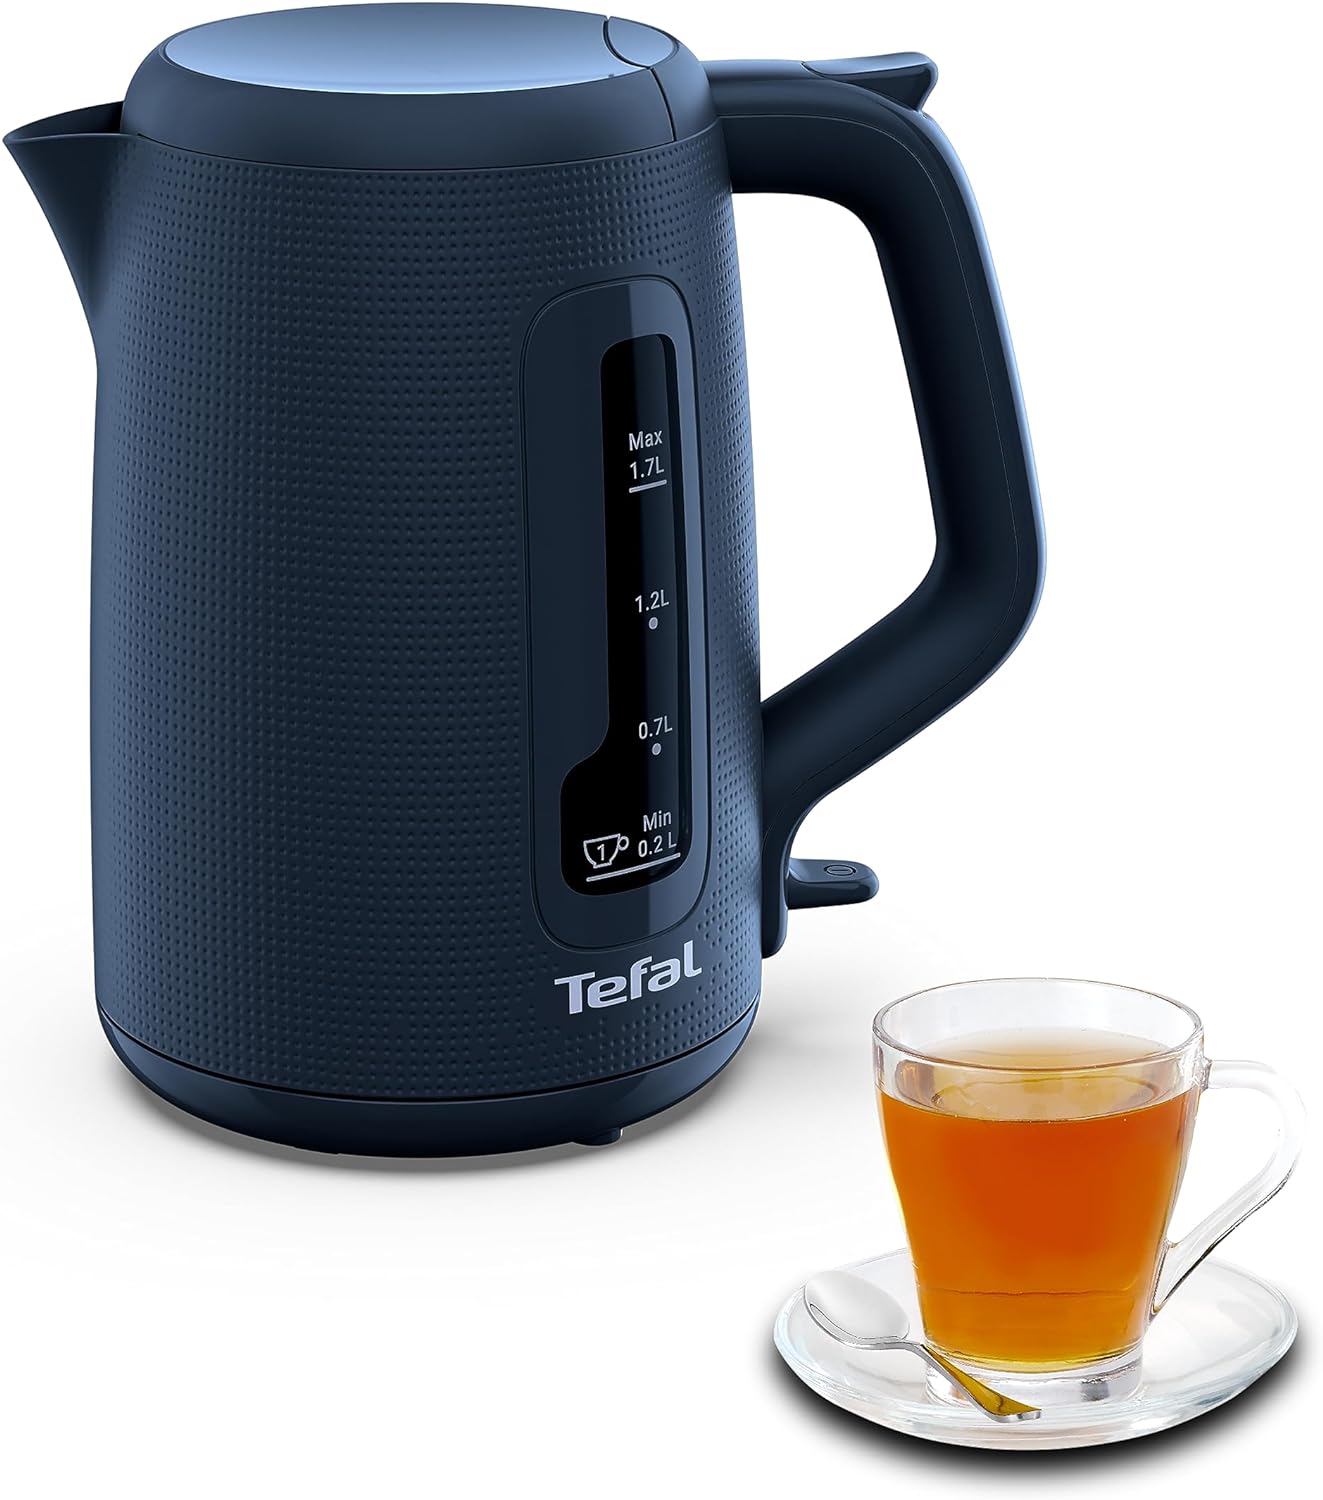 Tefal KO2M04 Morning Kettle | Elegant Design | 1.7L Capacity | Large Filling Opening | Wide Spout with Metal Filter | Covered Heating Element | Wanted Blue